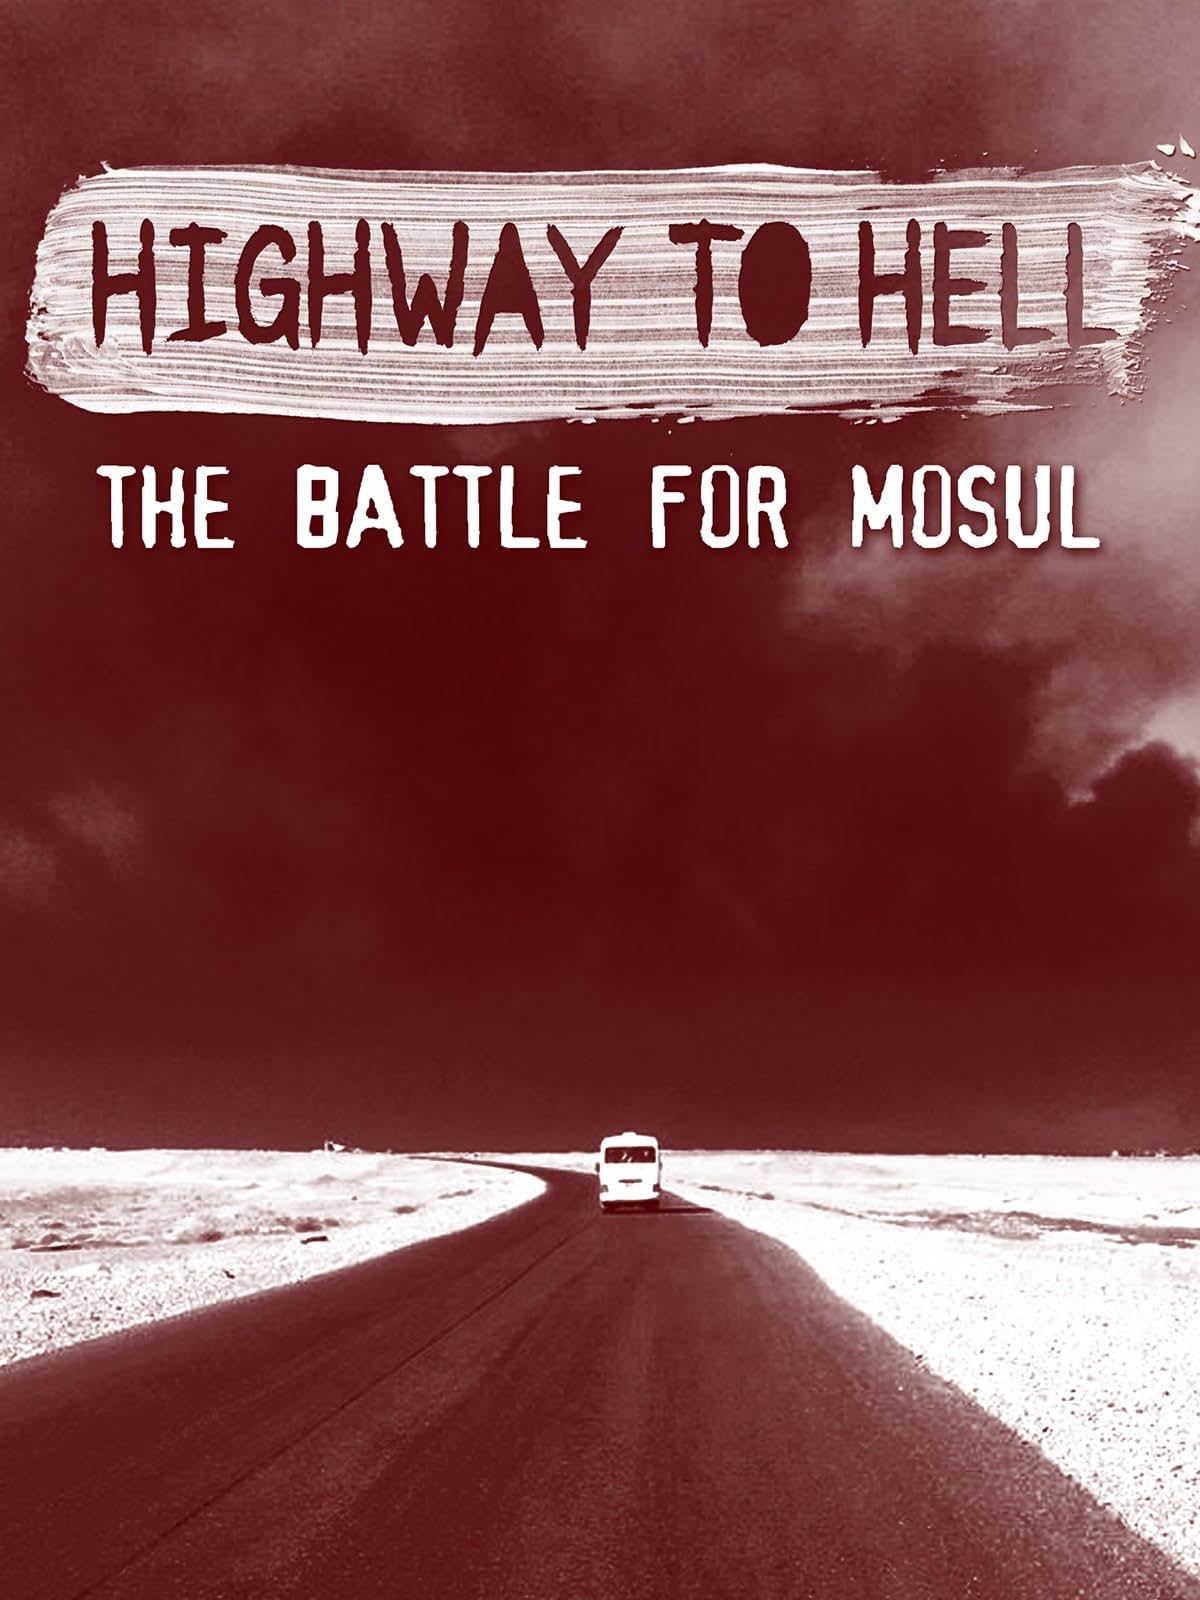     Highway to Hell: The Battle of Mosul